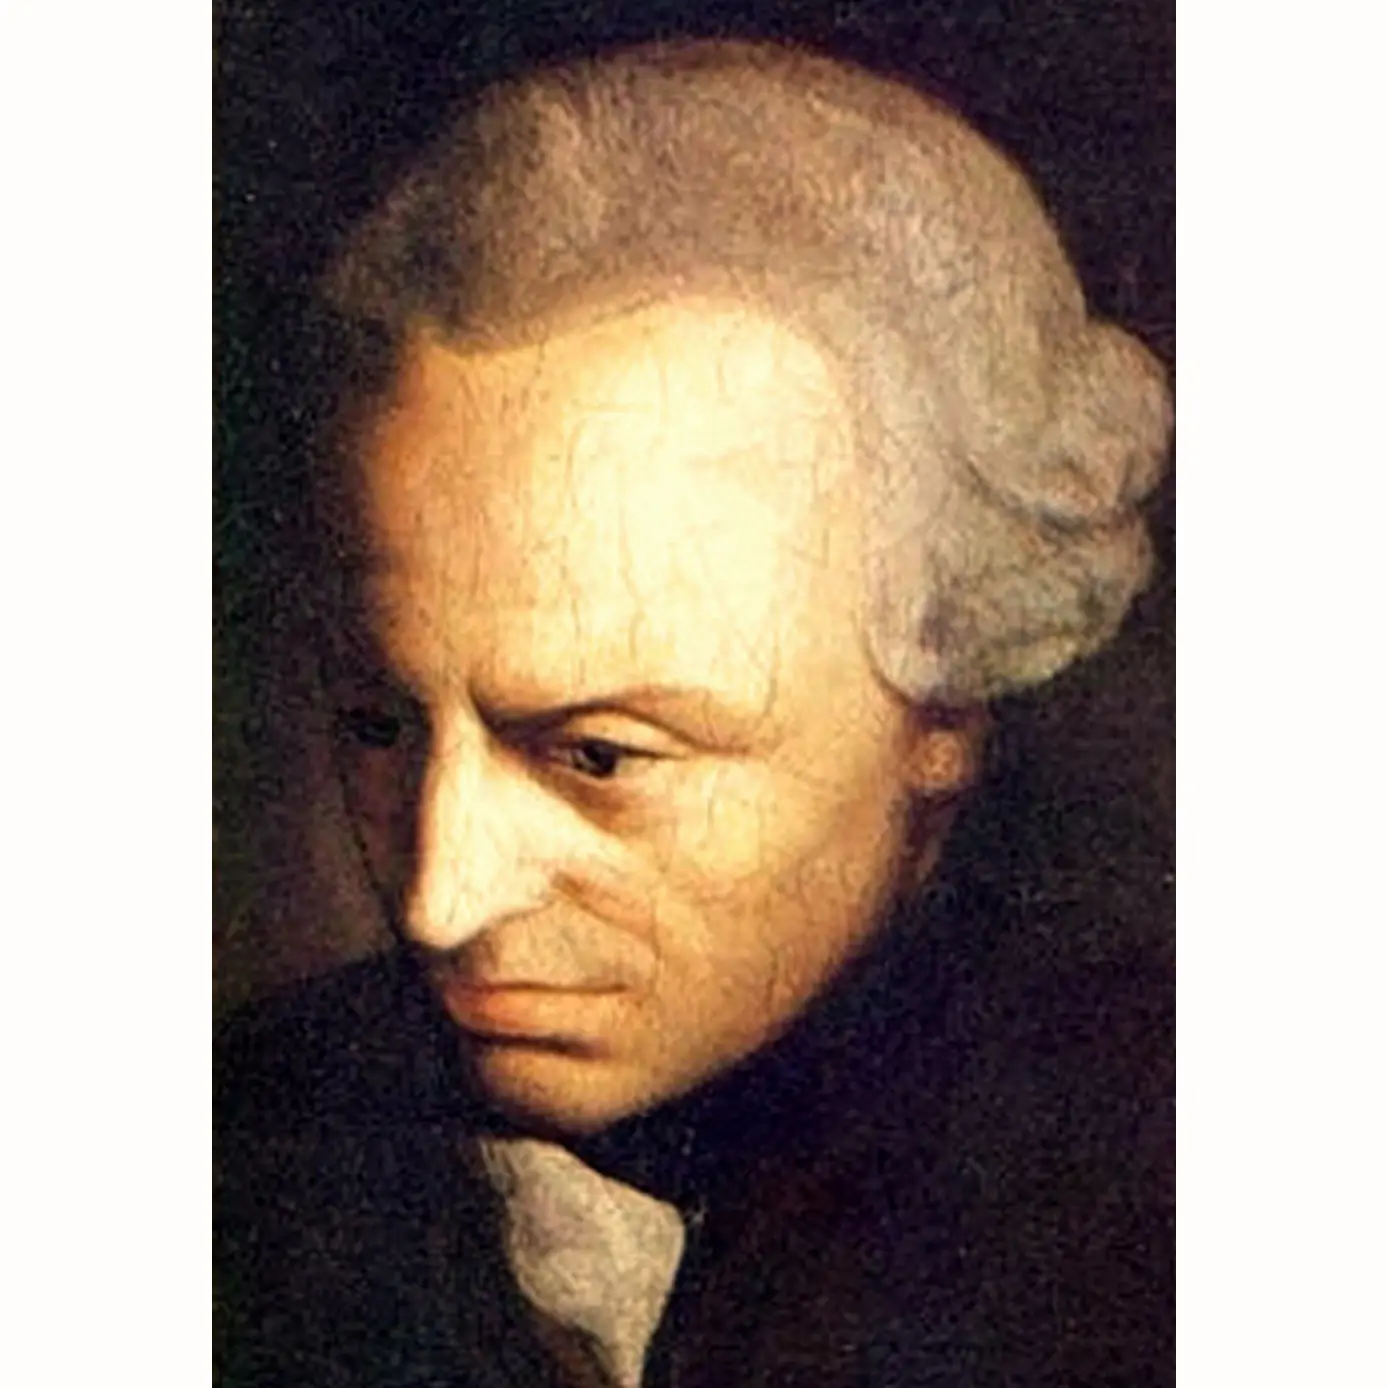 Immanuel Kant, painting c. 1790